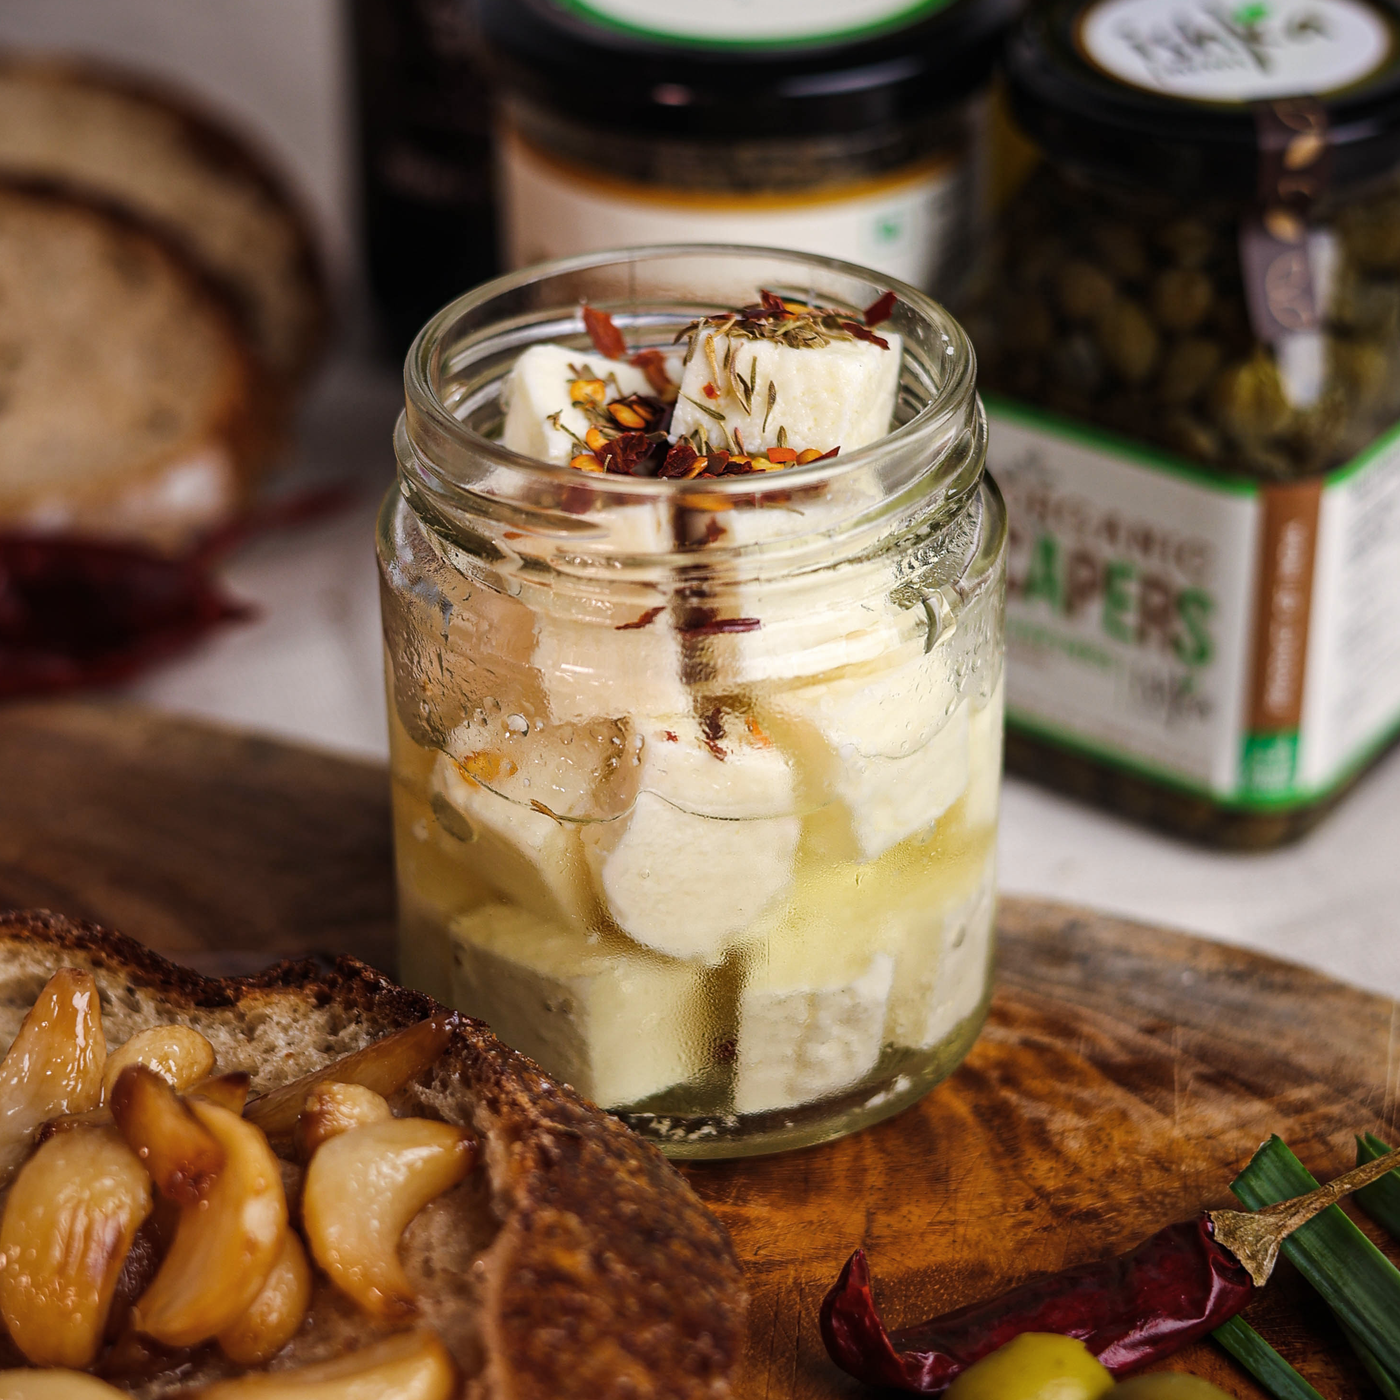 Brined Feta marinated in Olive oil with a blend of Thyme & Paprika. Available in 4 flavours.